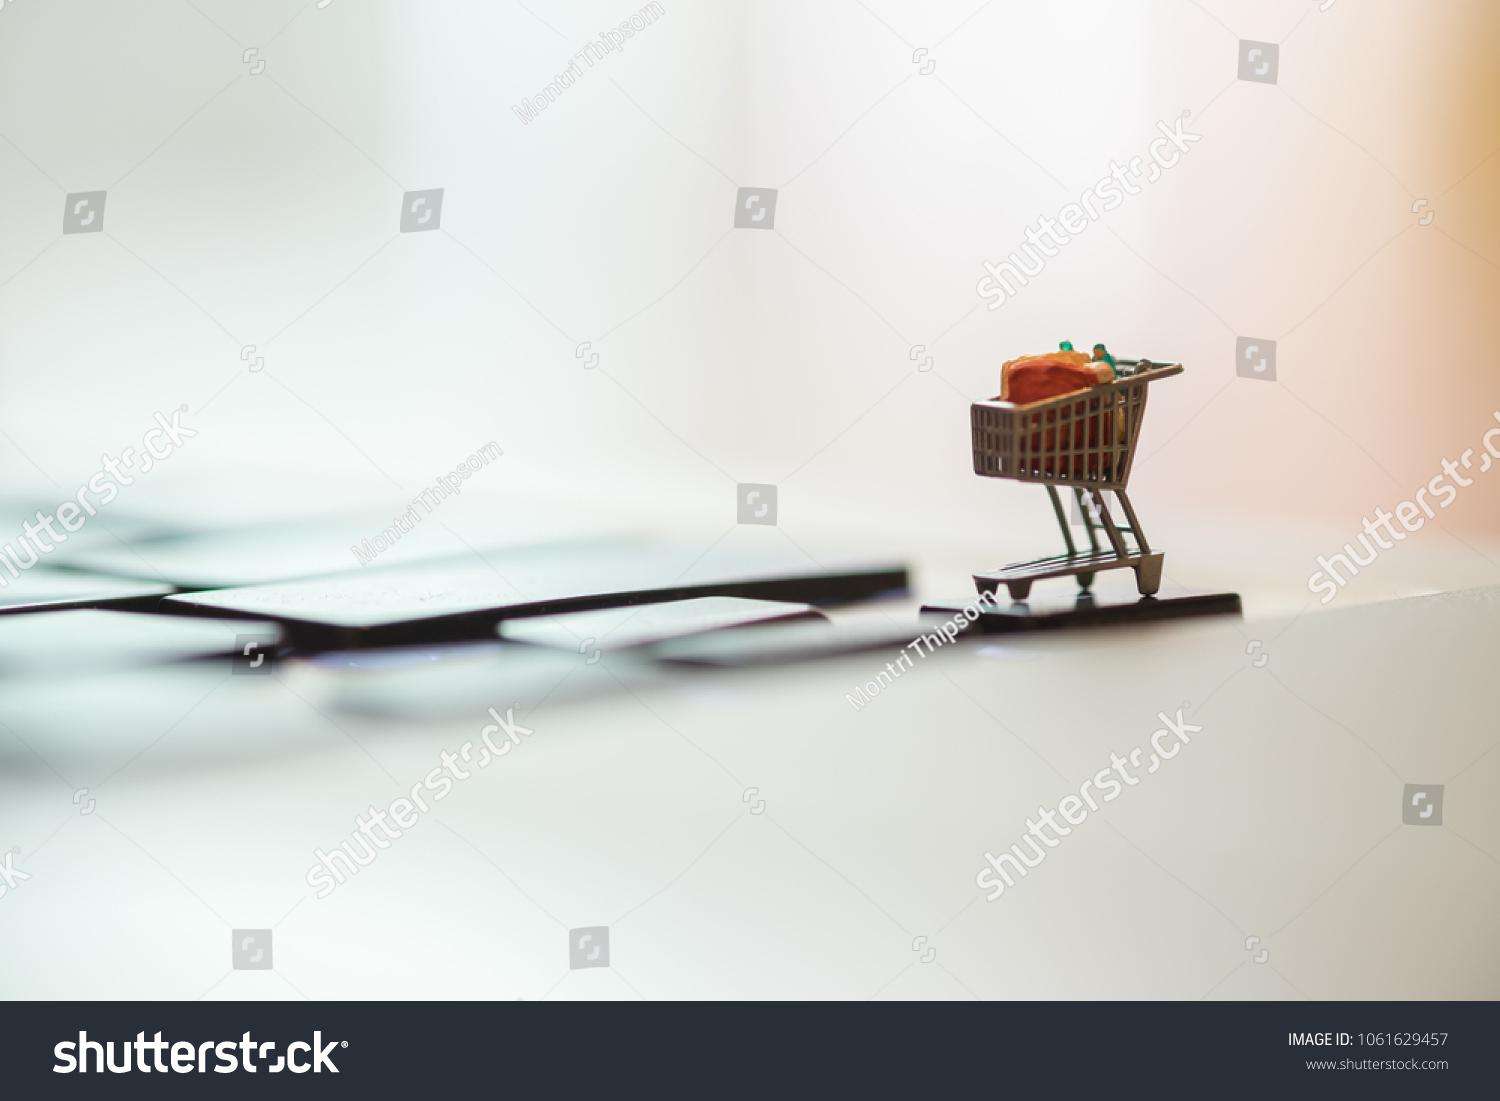 Close up of shopping cart or trolley miniature figure toy on laptop computer. Shopping, retail and e-commerce concept. #1061629457